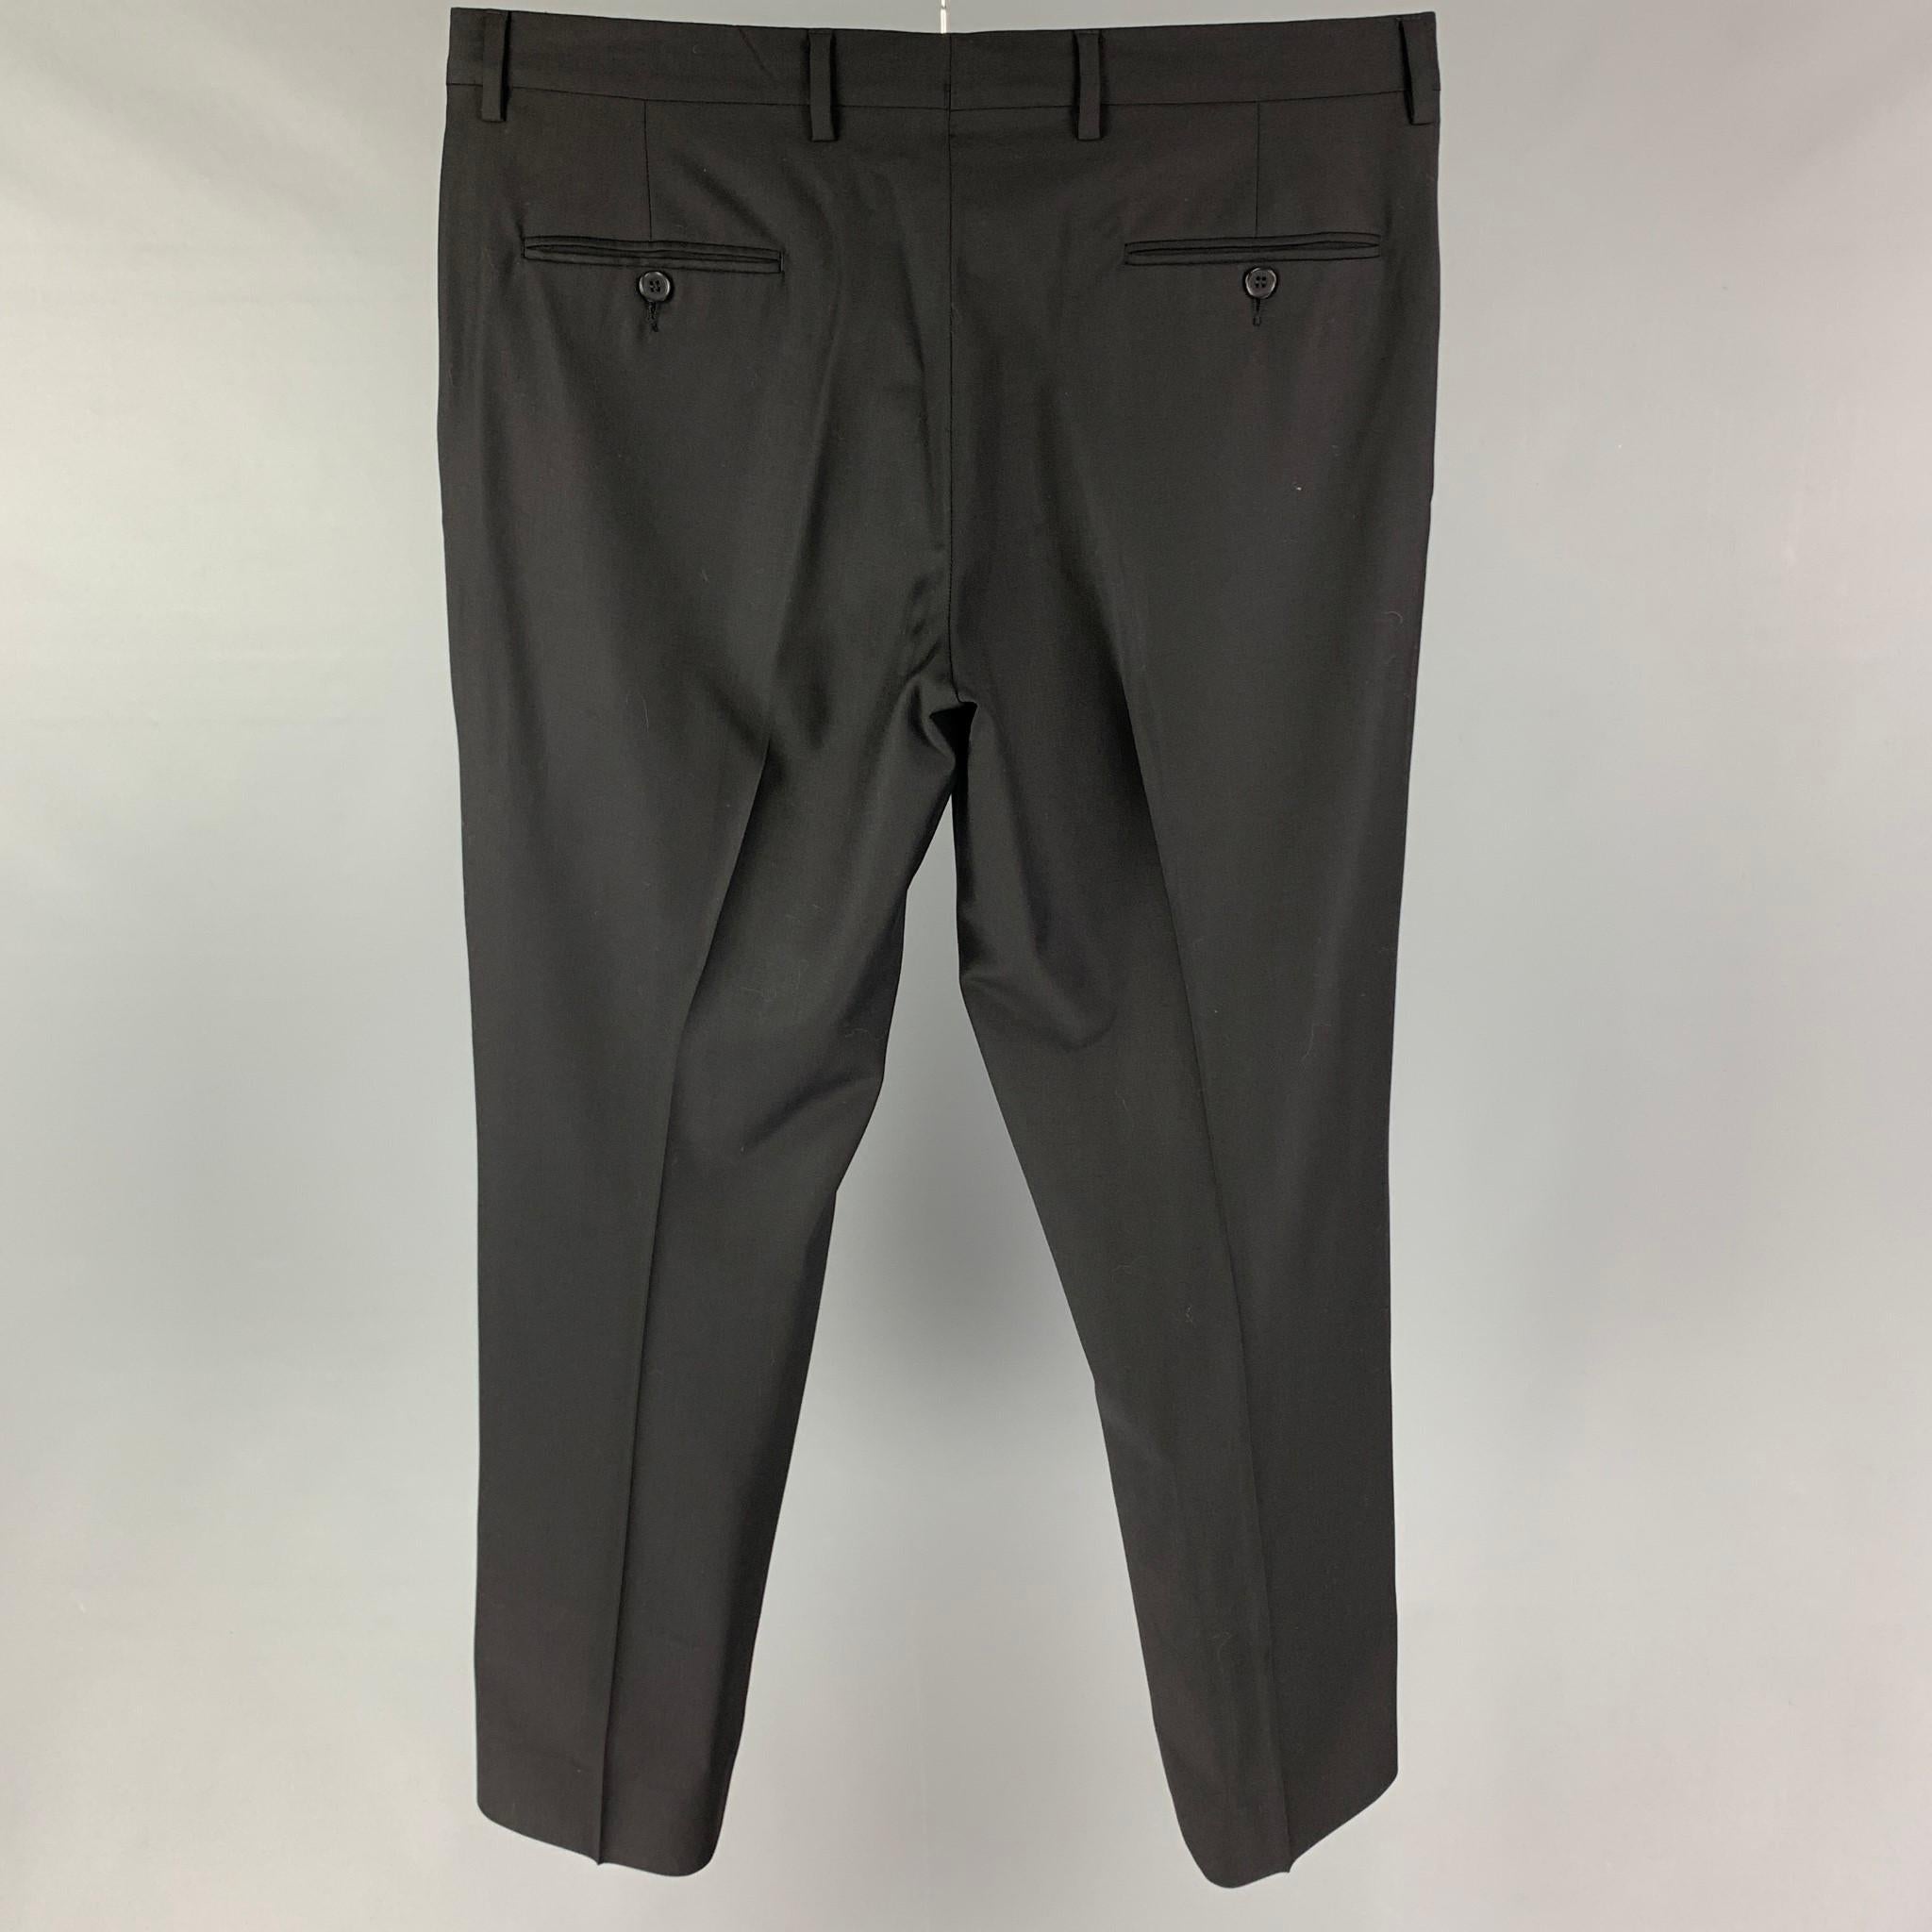 CALVIN KLEIN dress pants comes in a black wool featuring a flat front and a zip fly closure. 

Very Good Pre-Owned Condition.
Marked: 52/41

Measurements:

Waist: 36 in.
Rise: 10 in.
Inseam: 30 in. 